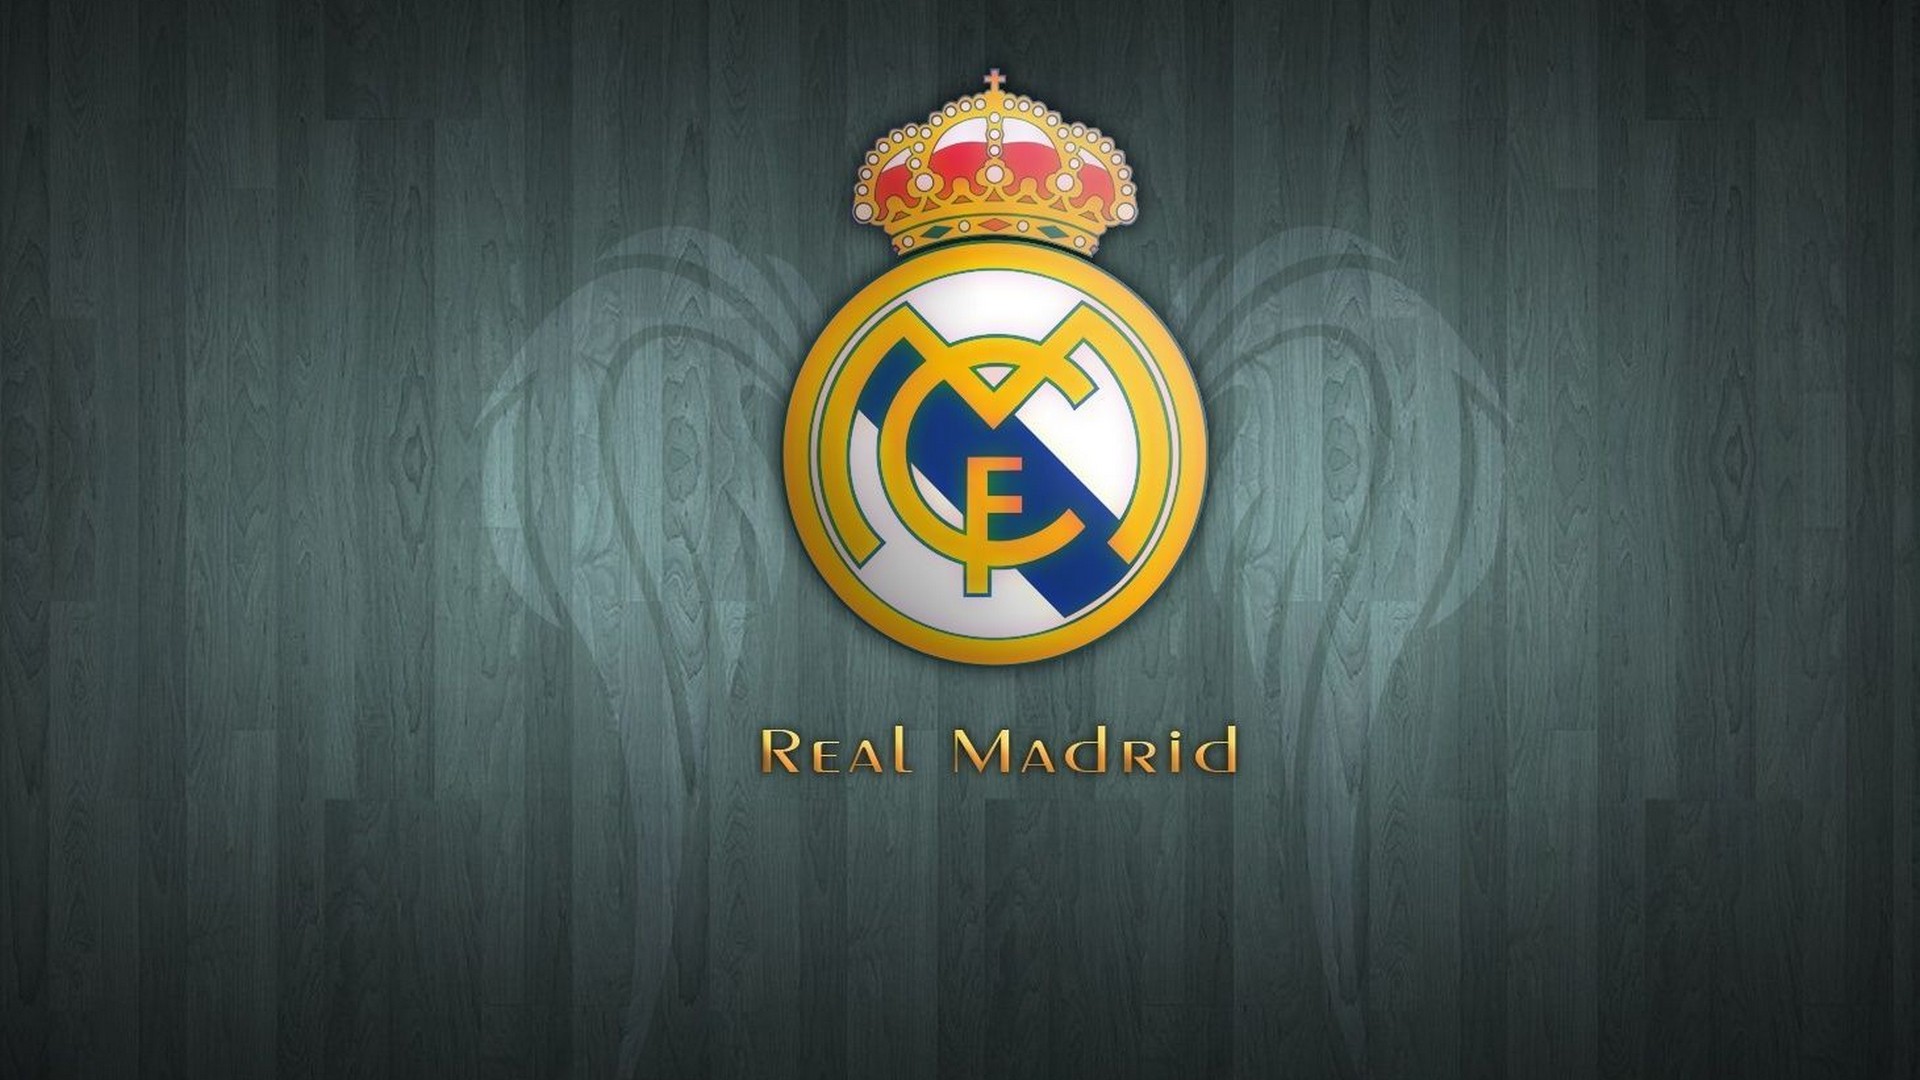 Wallpapers Real Madrid with resolution 1920x1080 pixel. You can make this wallpaper for your Mac or Windows Desktop Background, iPhone, Android or Tablet and another Smartphone device